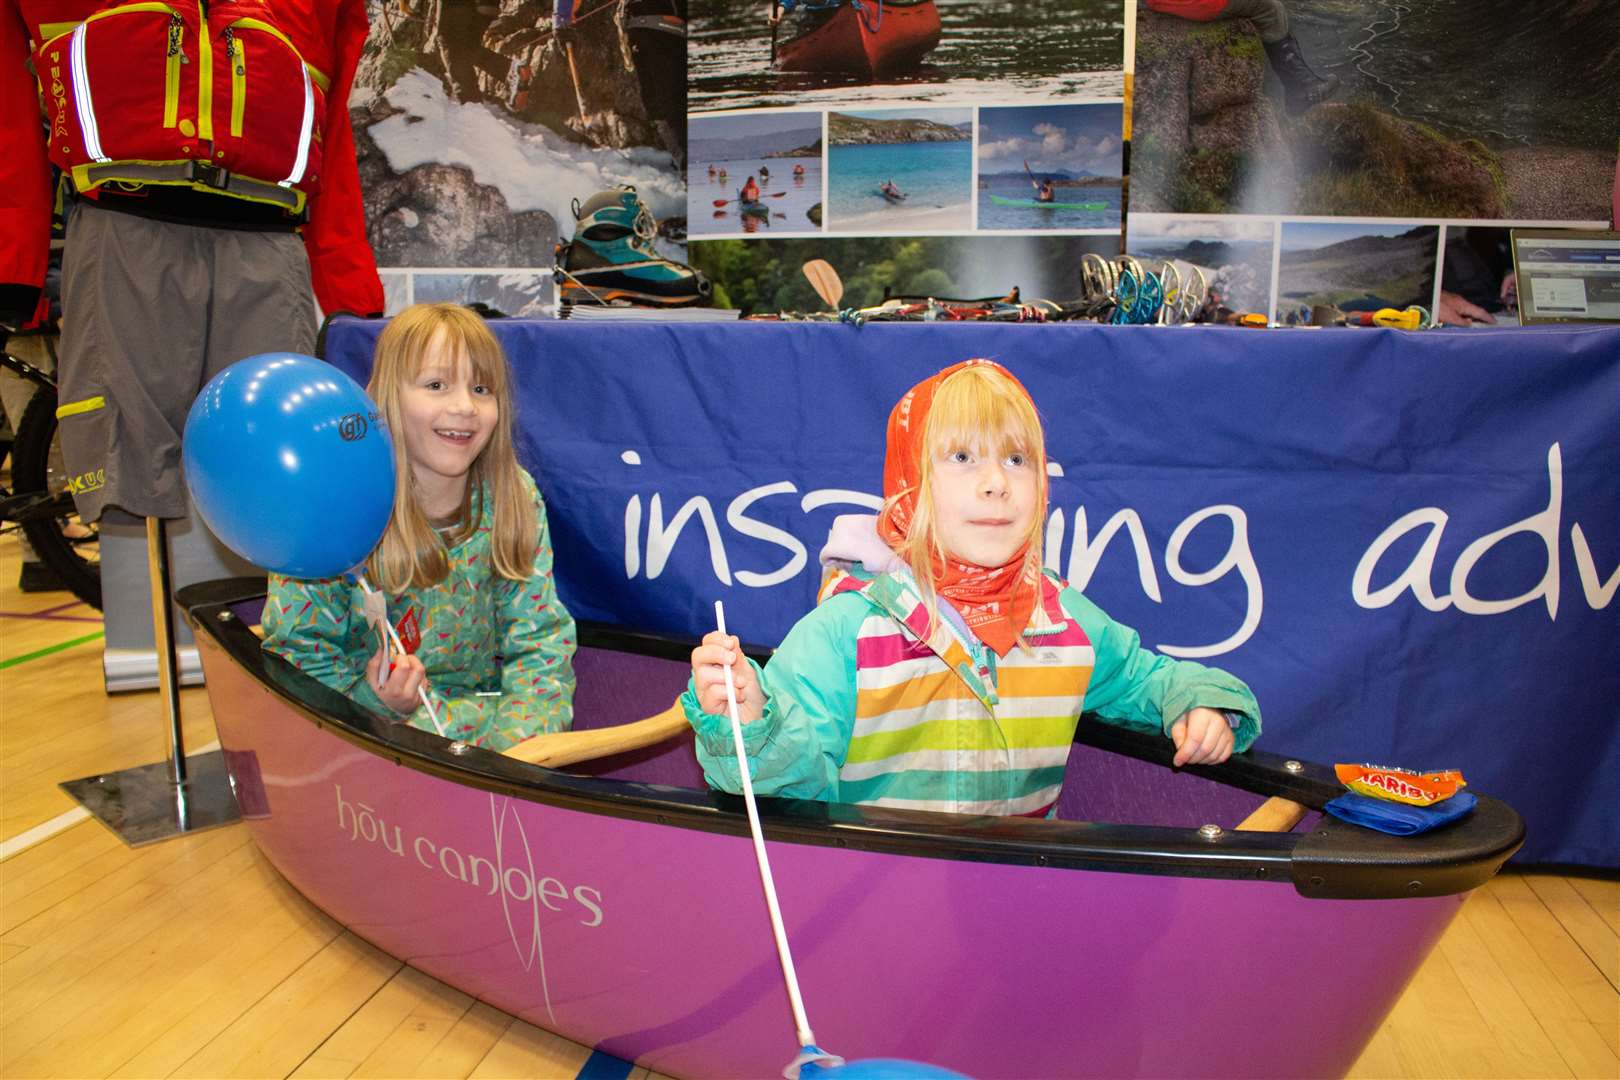 Trying out the open canoe at the Glenmore Lodge stand.